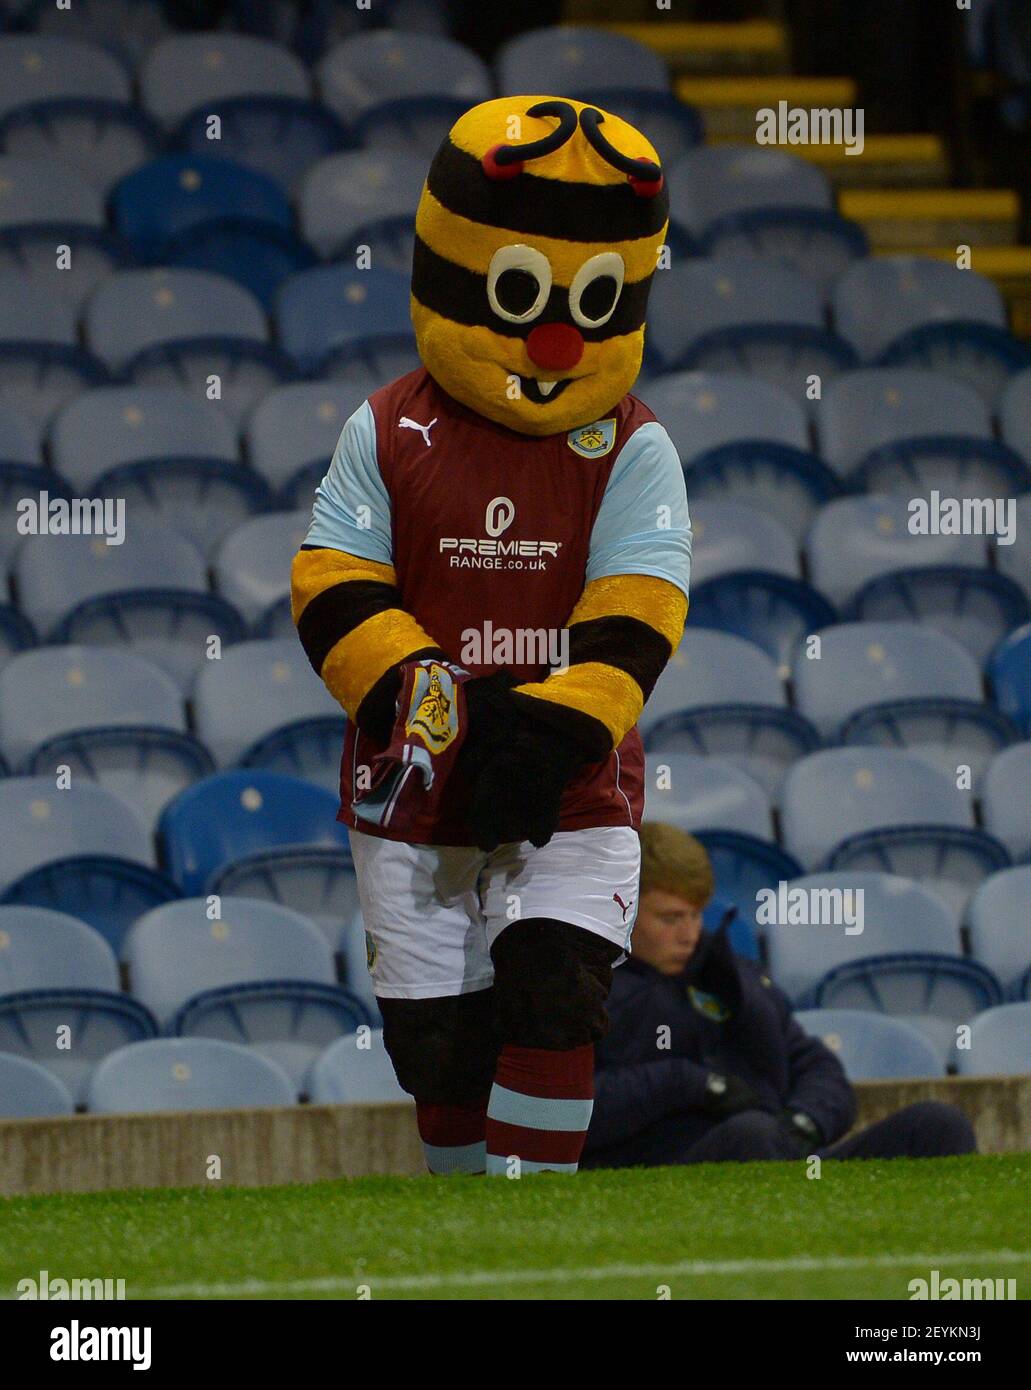 Oct. 29, 2013 - Burnley, United Kingdom - Burnley mascot Bertie Bee back on the touchline after he was sent off at the weekend. He tweeted a picture of himself in the police cells - Capital One Cup Fourth Round - Burnley vs West Ham Utd - Turf Moor Stadium - Burnley - England - 29/10/13 - Picture Simon Bellis/Sportimage/Cal Sport Media/Sipa USA. Stock Photo